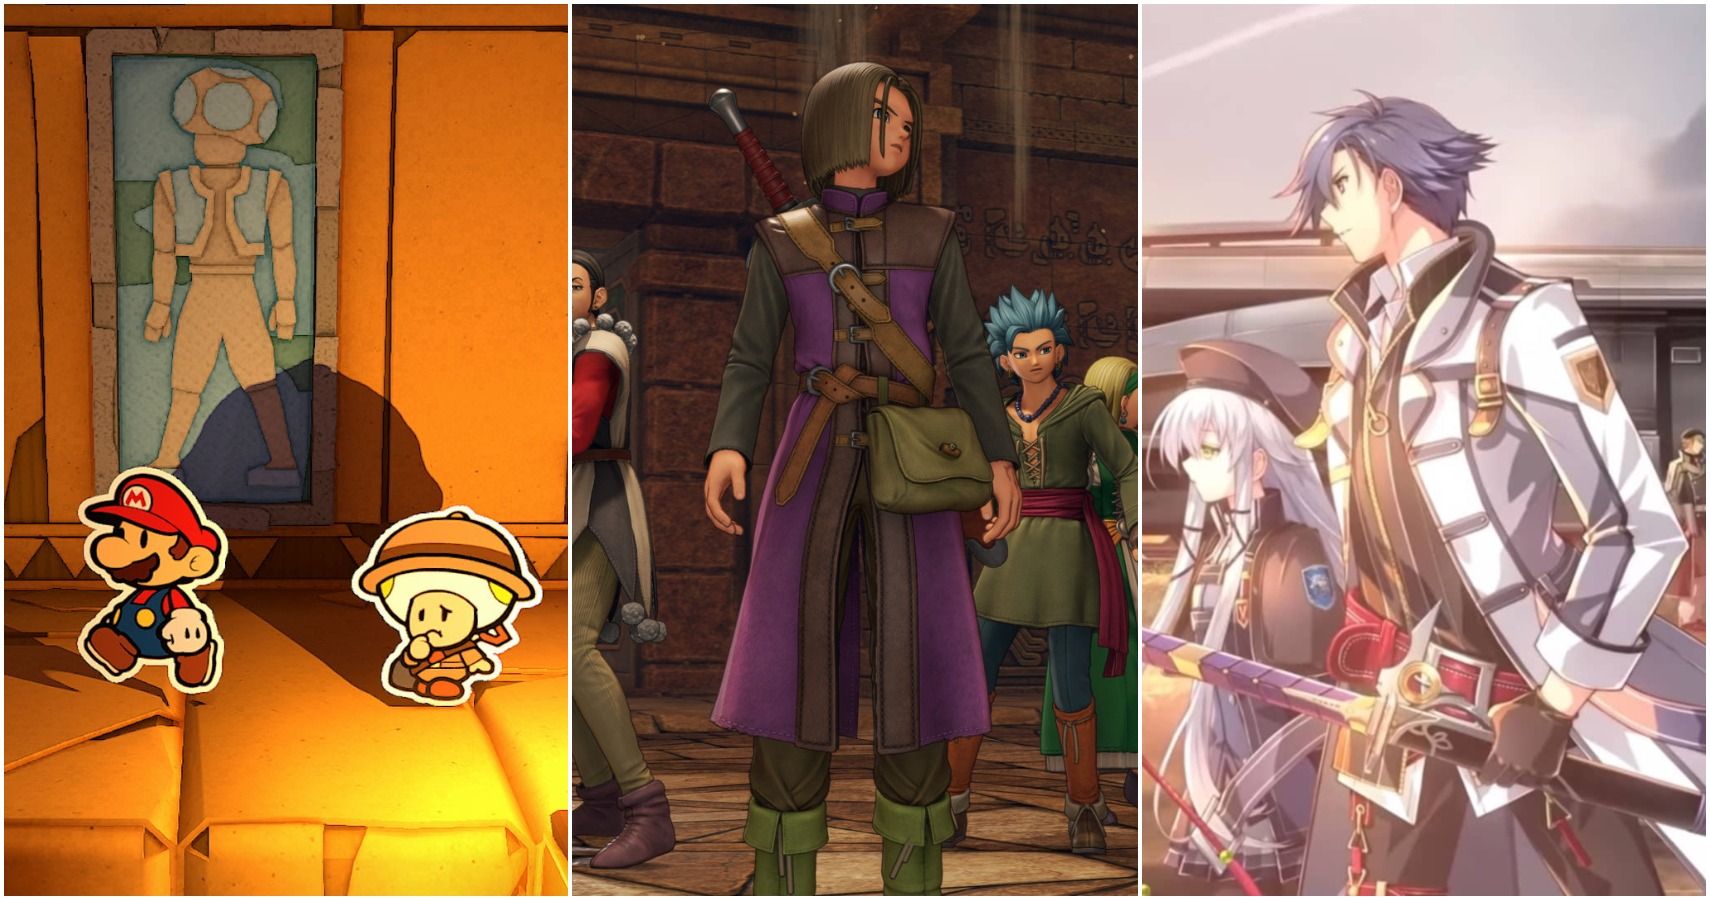 Screenshots from Paper Mario, Dragon Quest, and Trails Of Cold Steel